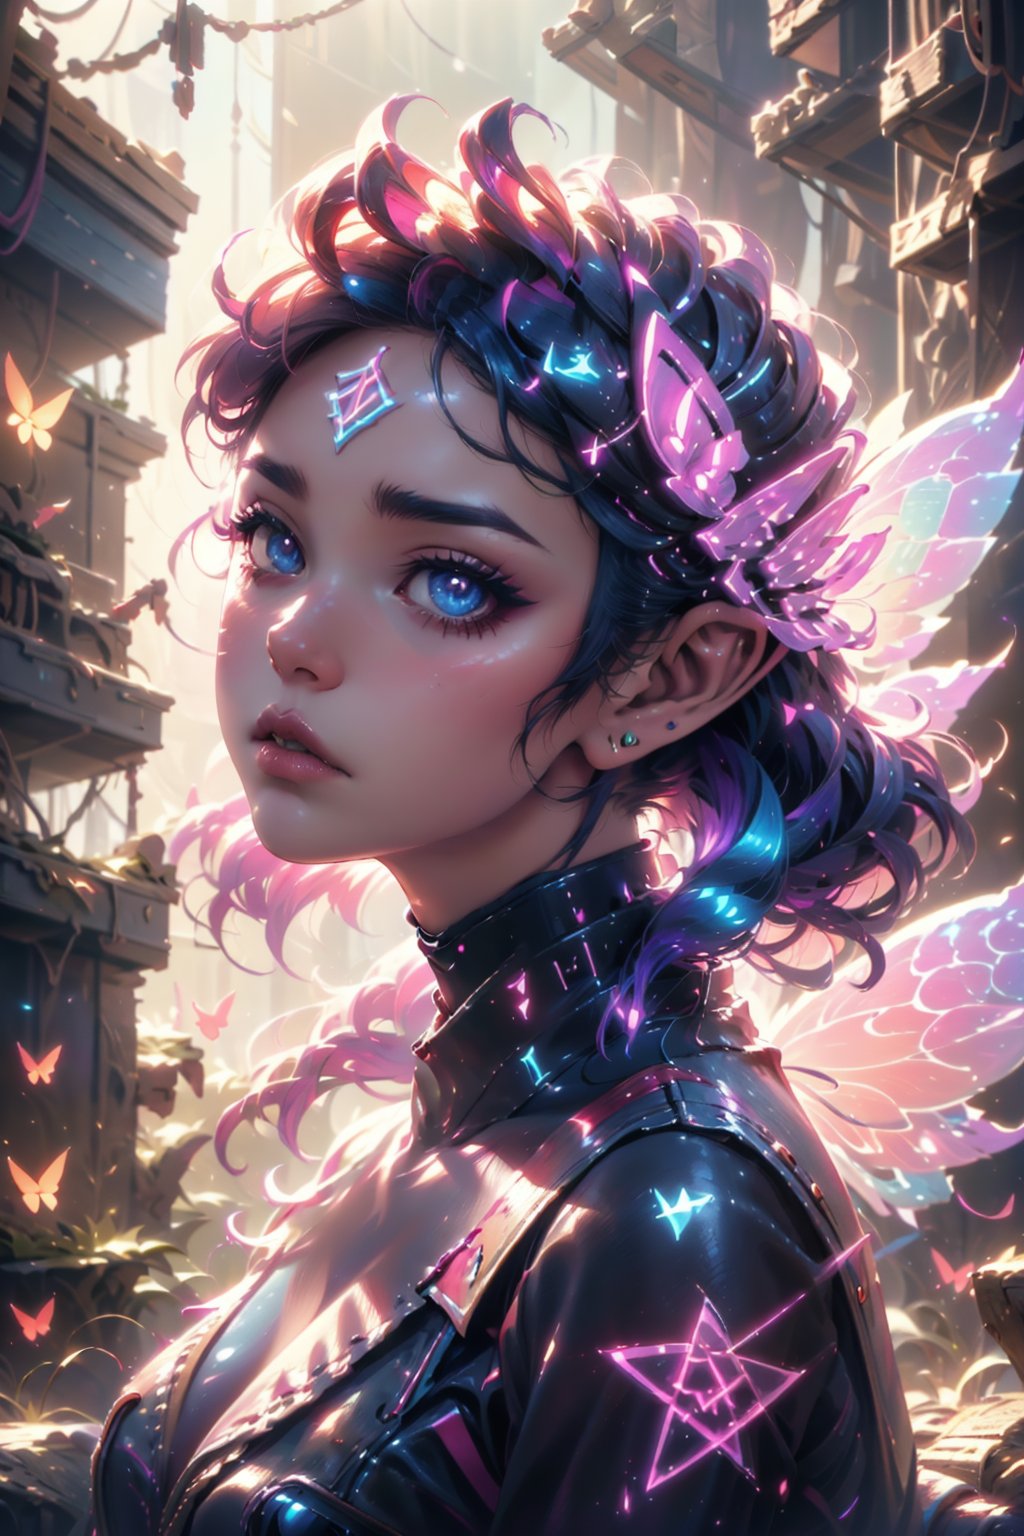 fairy, butterfly_wings,gem,vibrant colors, (((cyberpunk style))), looking_at_viewer , facing front, sad, night, soft lighting, Detailedface, (portrait:1.2), GlowingRunes_blue